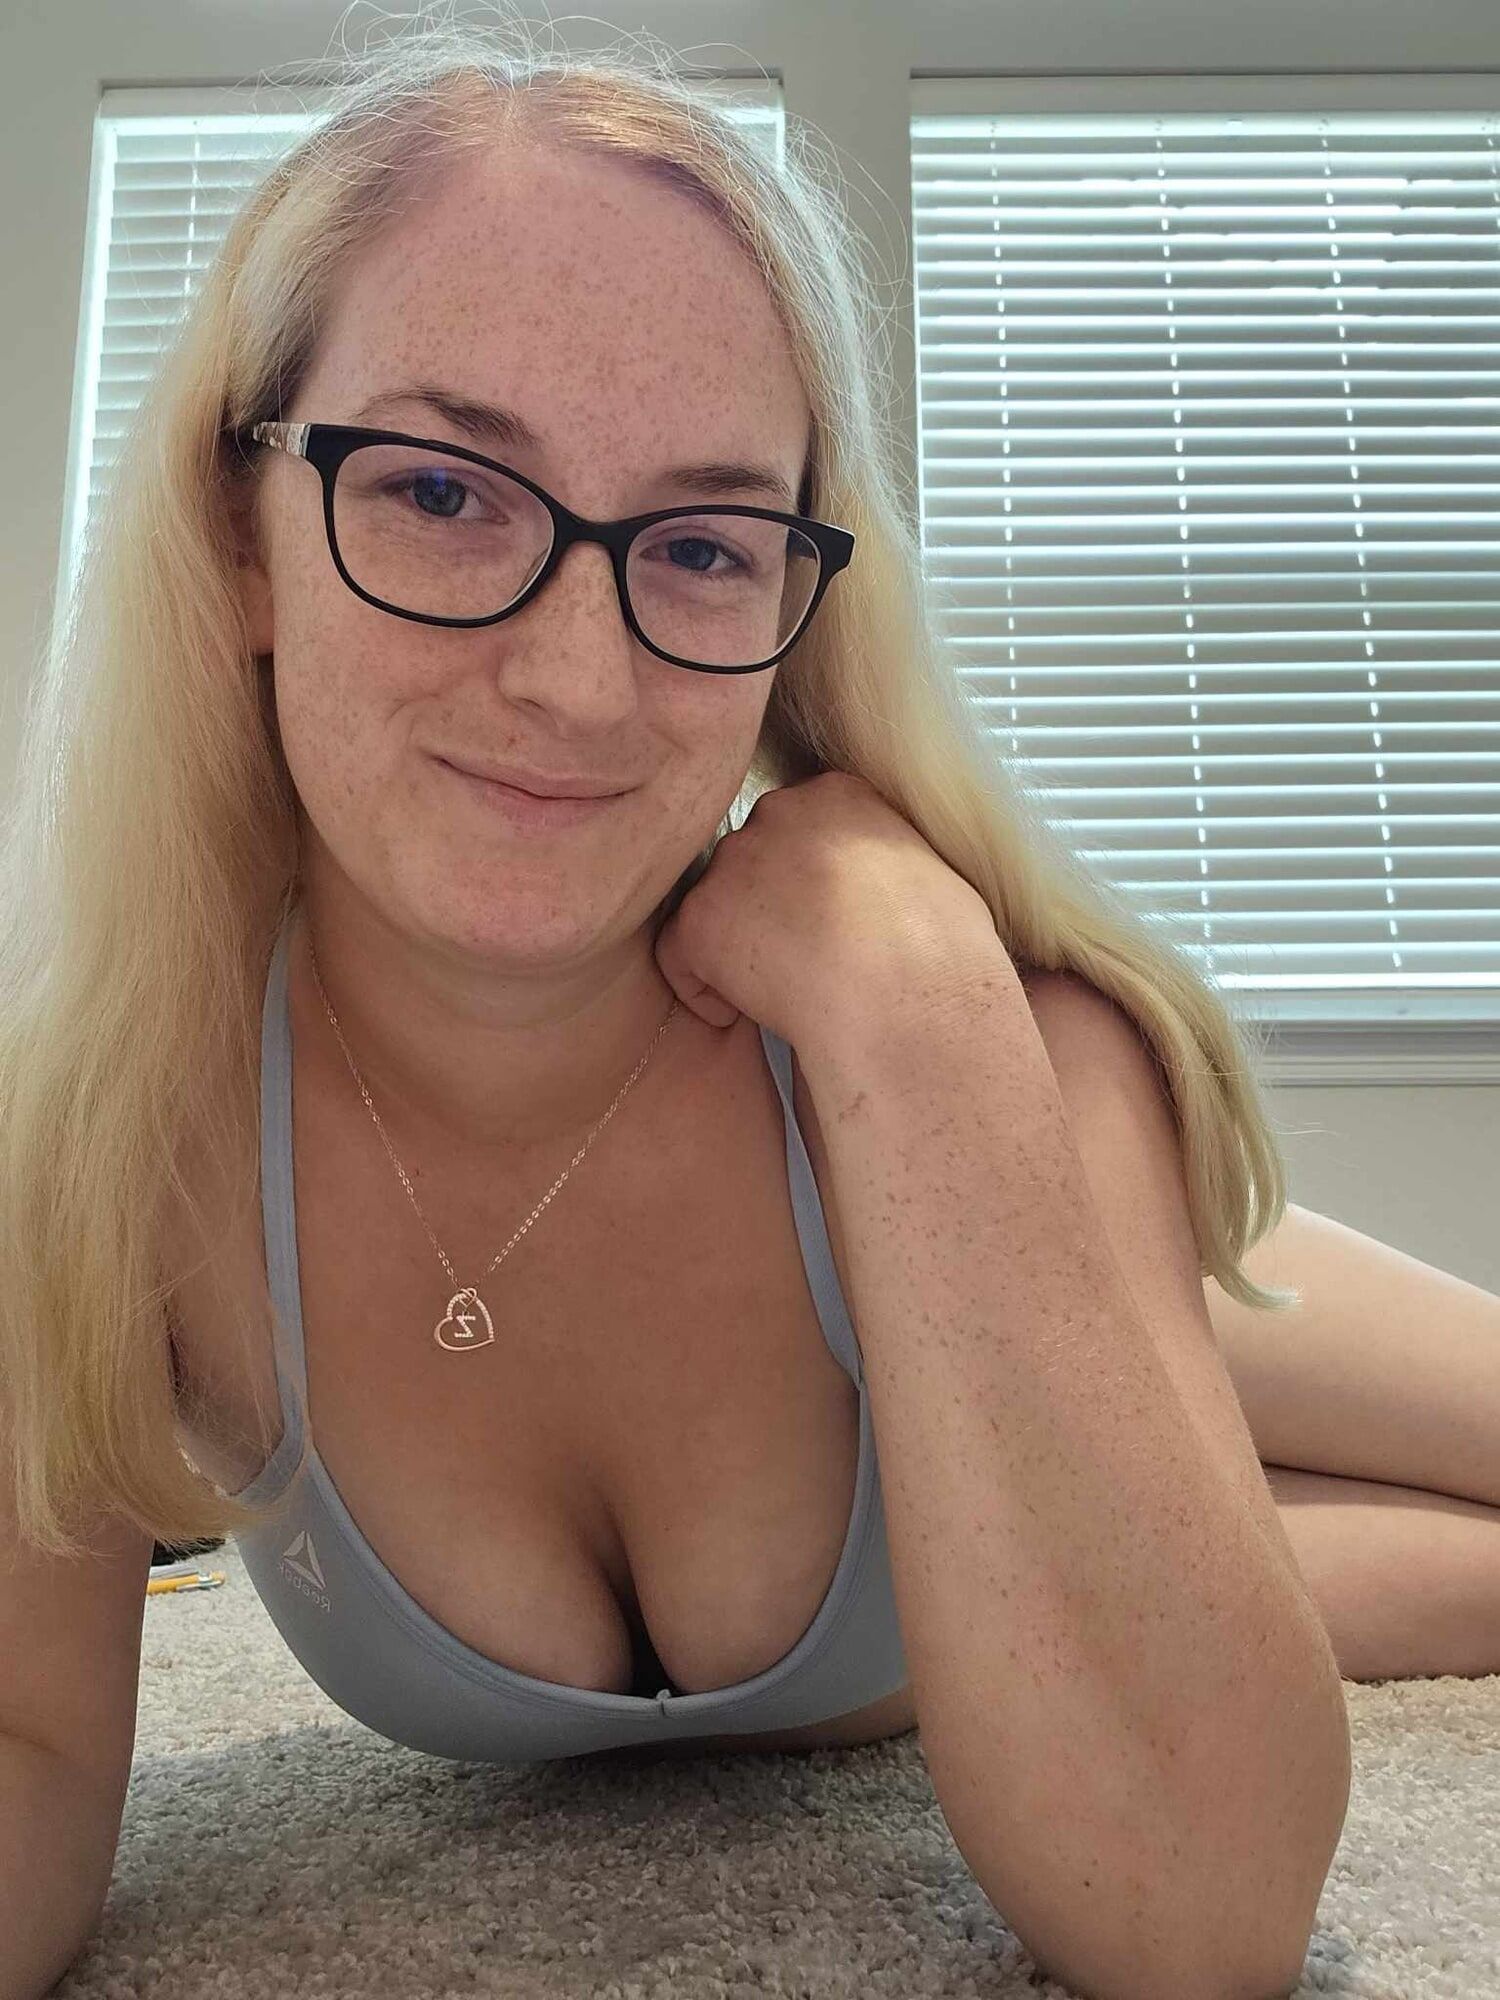 (Vids on Profile) Another slutty collection - Mama_Foxx94 #14